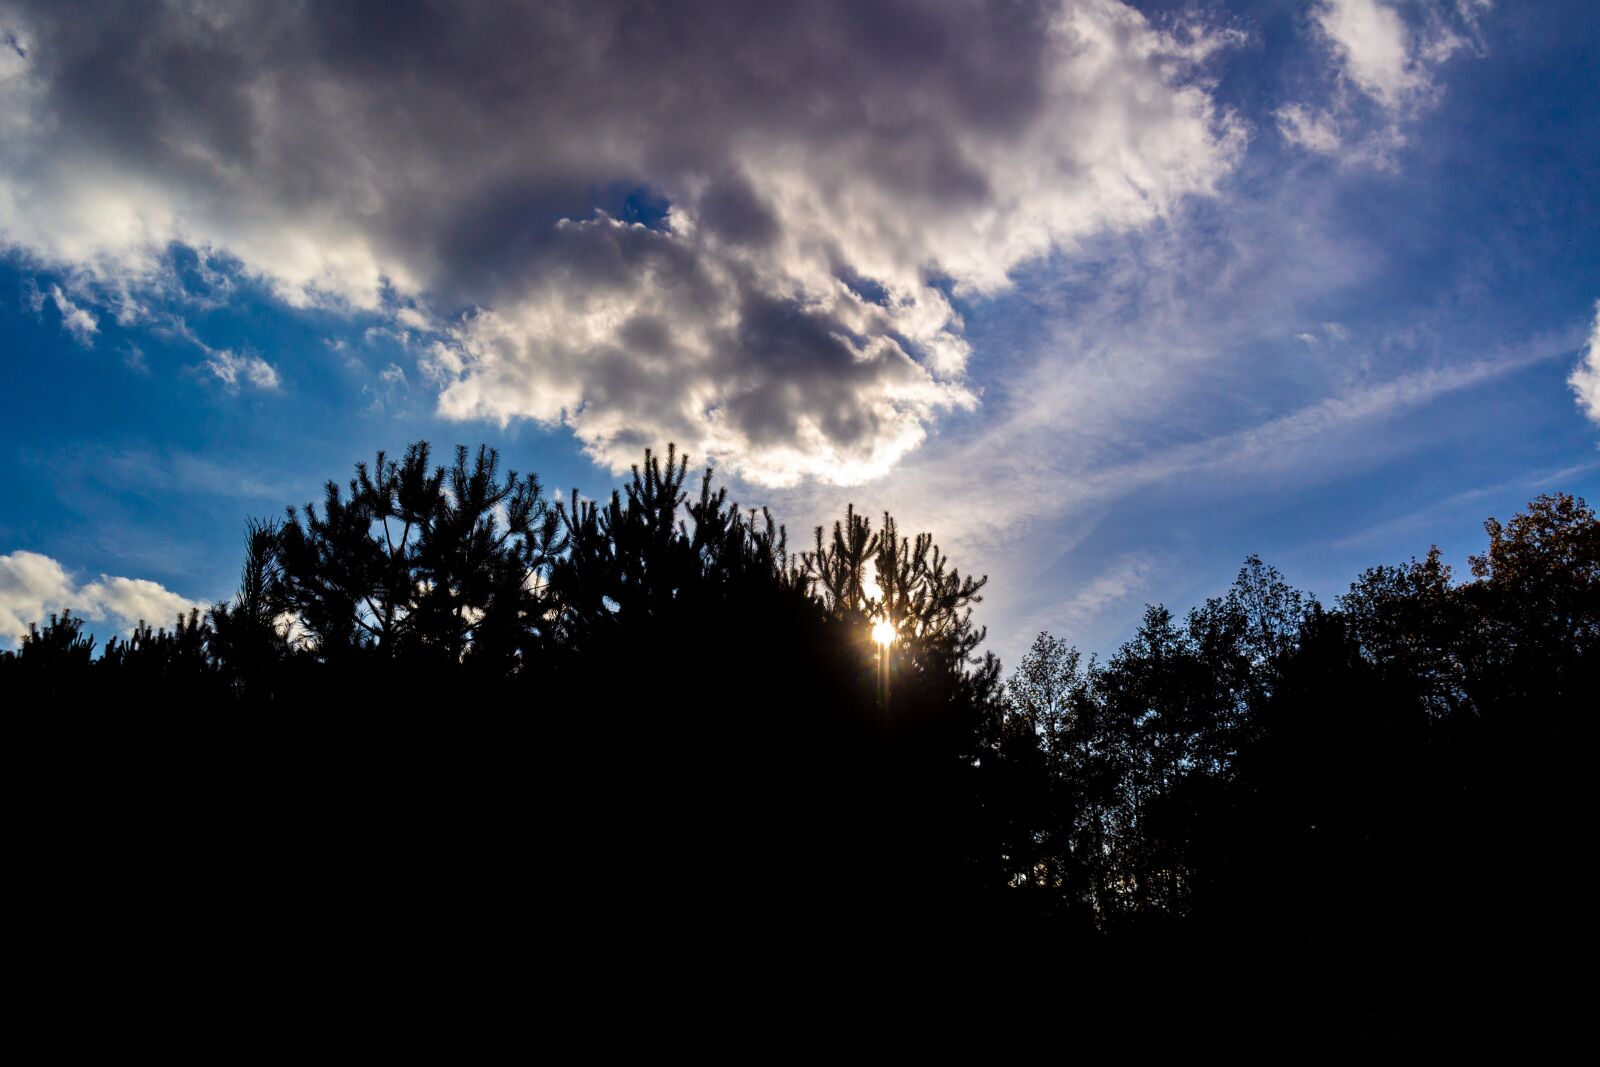 Samsung NX300 sample photo. Nature, landscape, clouds photography